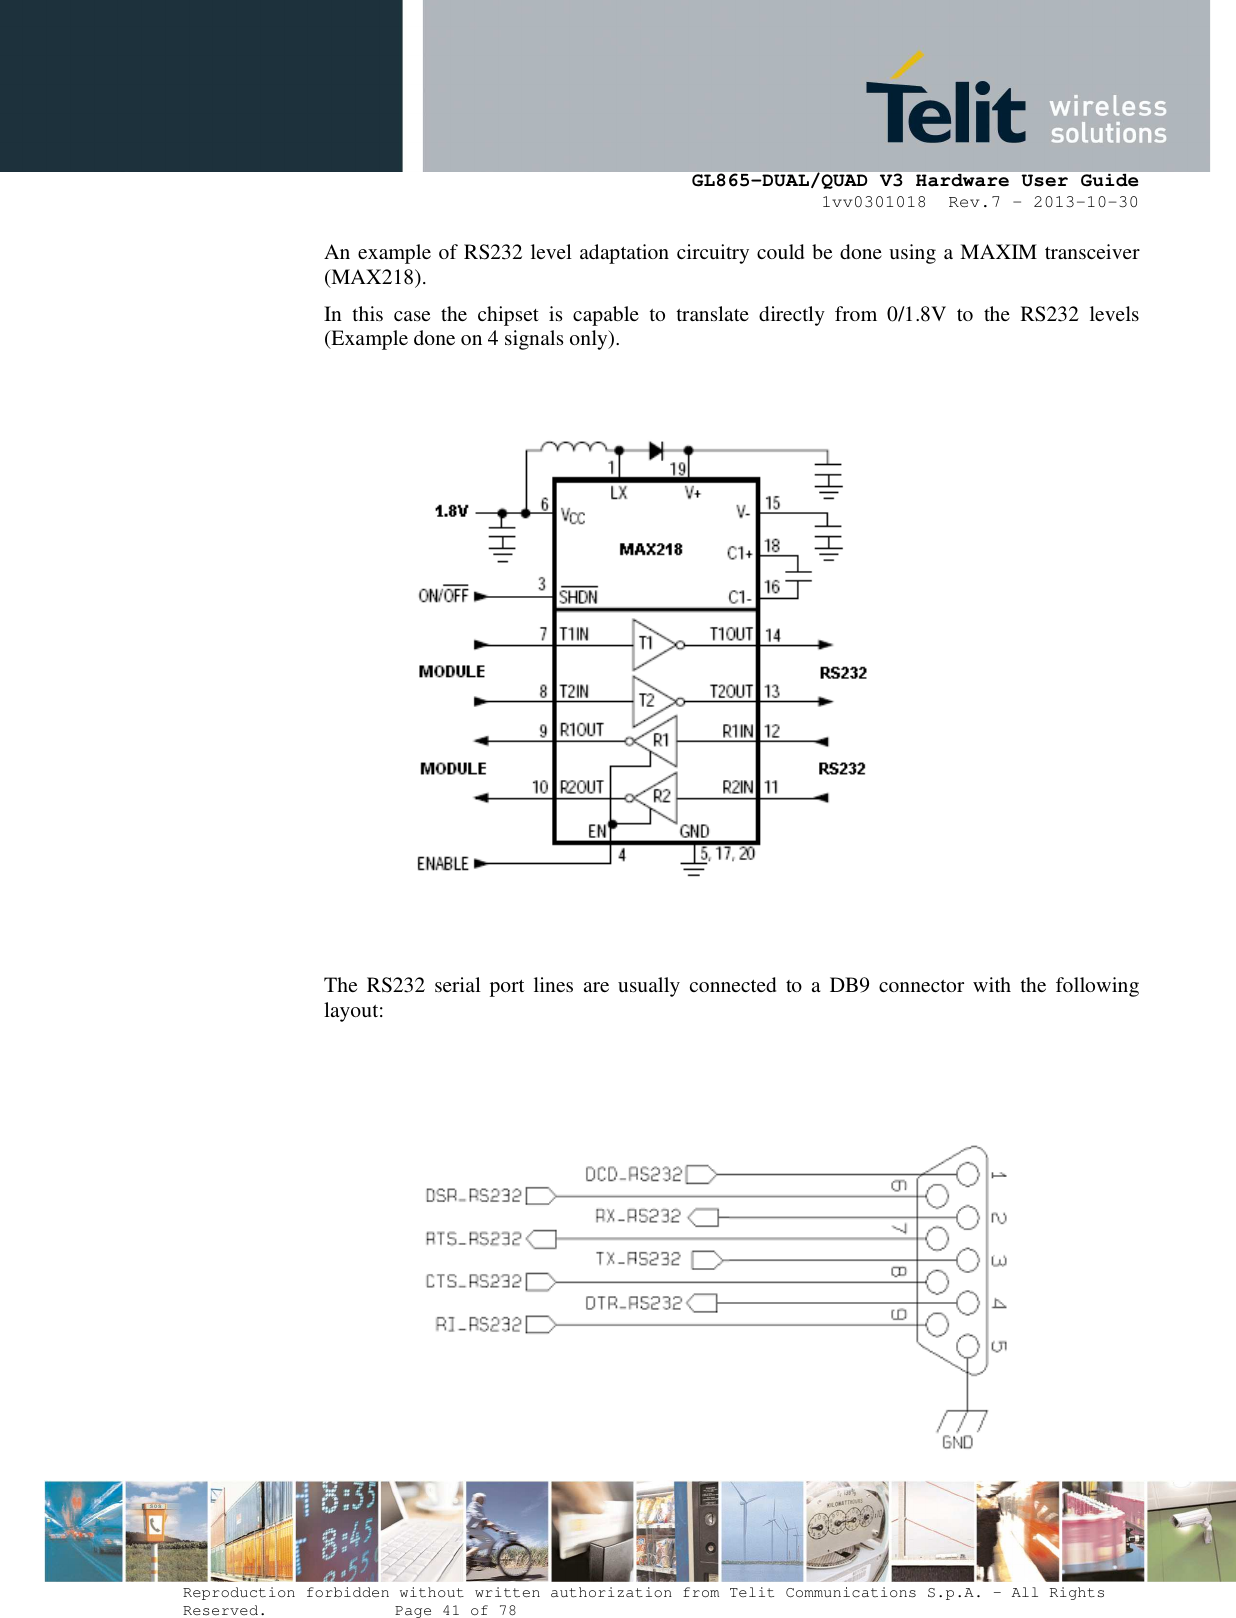      GL865-DUAL/QUAD V3 Hardware User Guide 1vv0301018  Rev.7 – 2013-10-30  Reproduction forbidden without written authorization from Telit Communications S.p.A. - All Rights Reserved.    Page 41 of 78 Mod. 0805 2011-07 Rev.2 An example of RS232 level adaptation circuitry could be done using a MAXIM transceiver (MAX218).  In  this  case  the  chipset  is  capable  to  translate  directly  from  0/1.8V  to  the  RS232  levels (Example done on 4 signals only).       The  RS232 serial  port lines  are usually  connected  to a  DB9  connector with  the  following layout:     